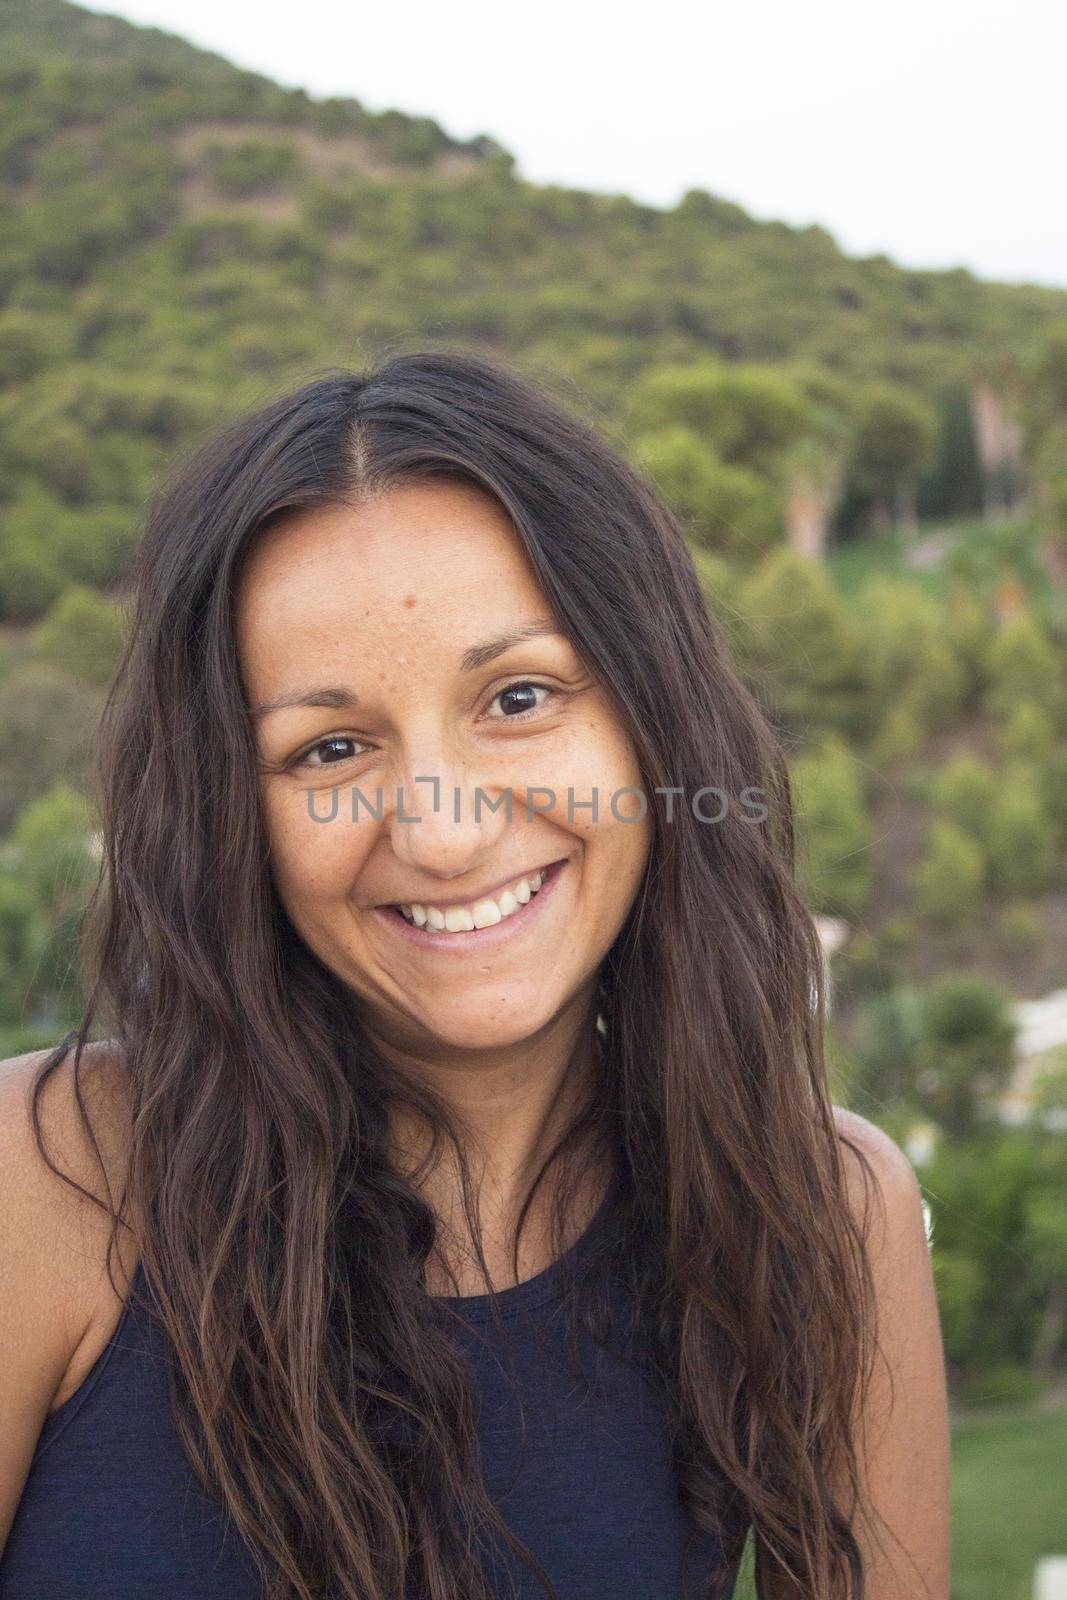 Portrait of youthful woman on mountain background. Smiling.